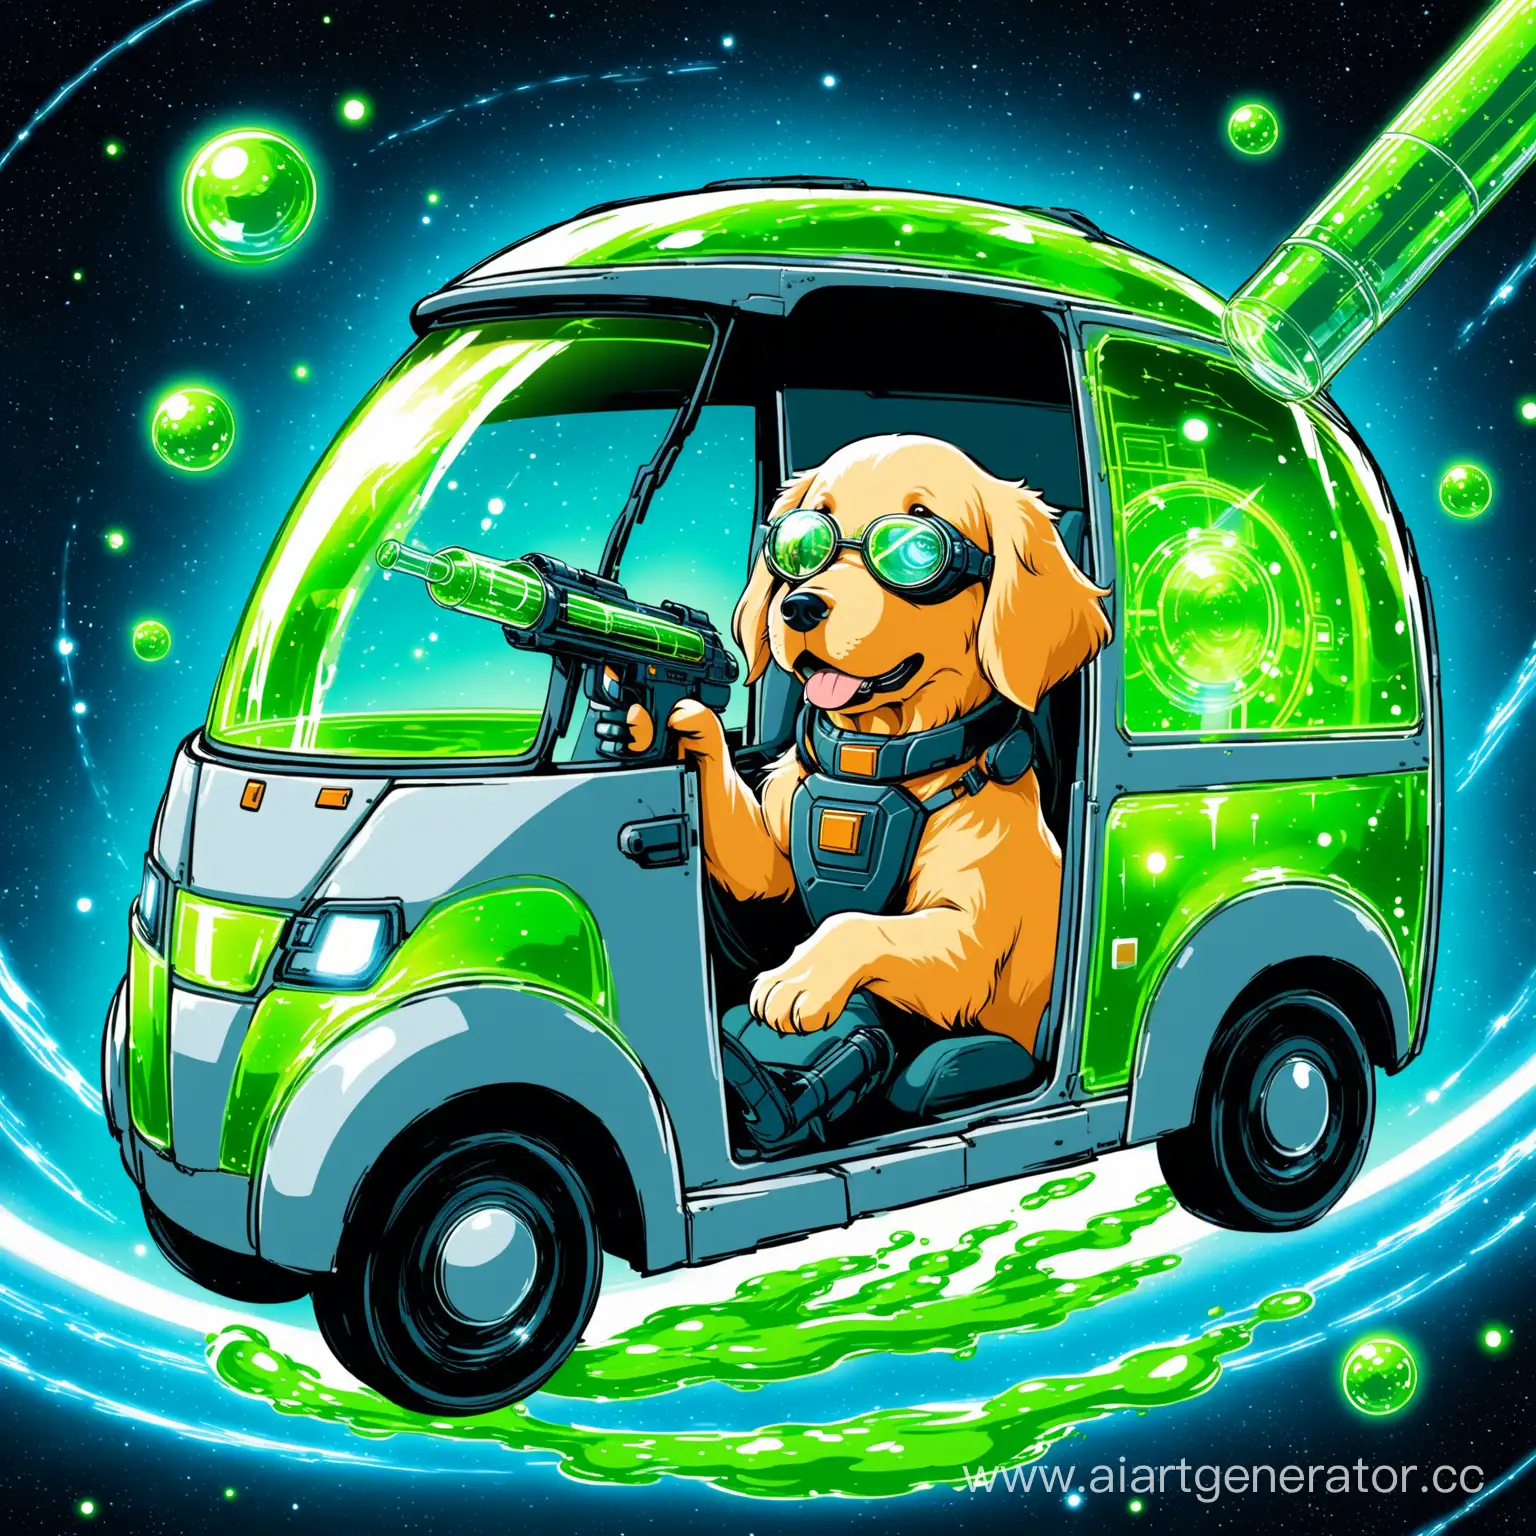 Golden retriver wearing a hero suit with transparent protect glasses in space and it is inventing technology , hold cylindrical lab tube look like a futristic gun  inside green luqid , teleport gate background , future mood  , he is draving a space van